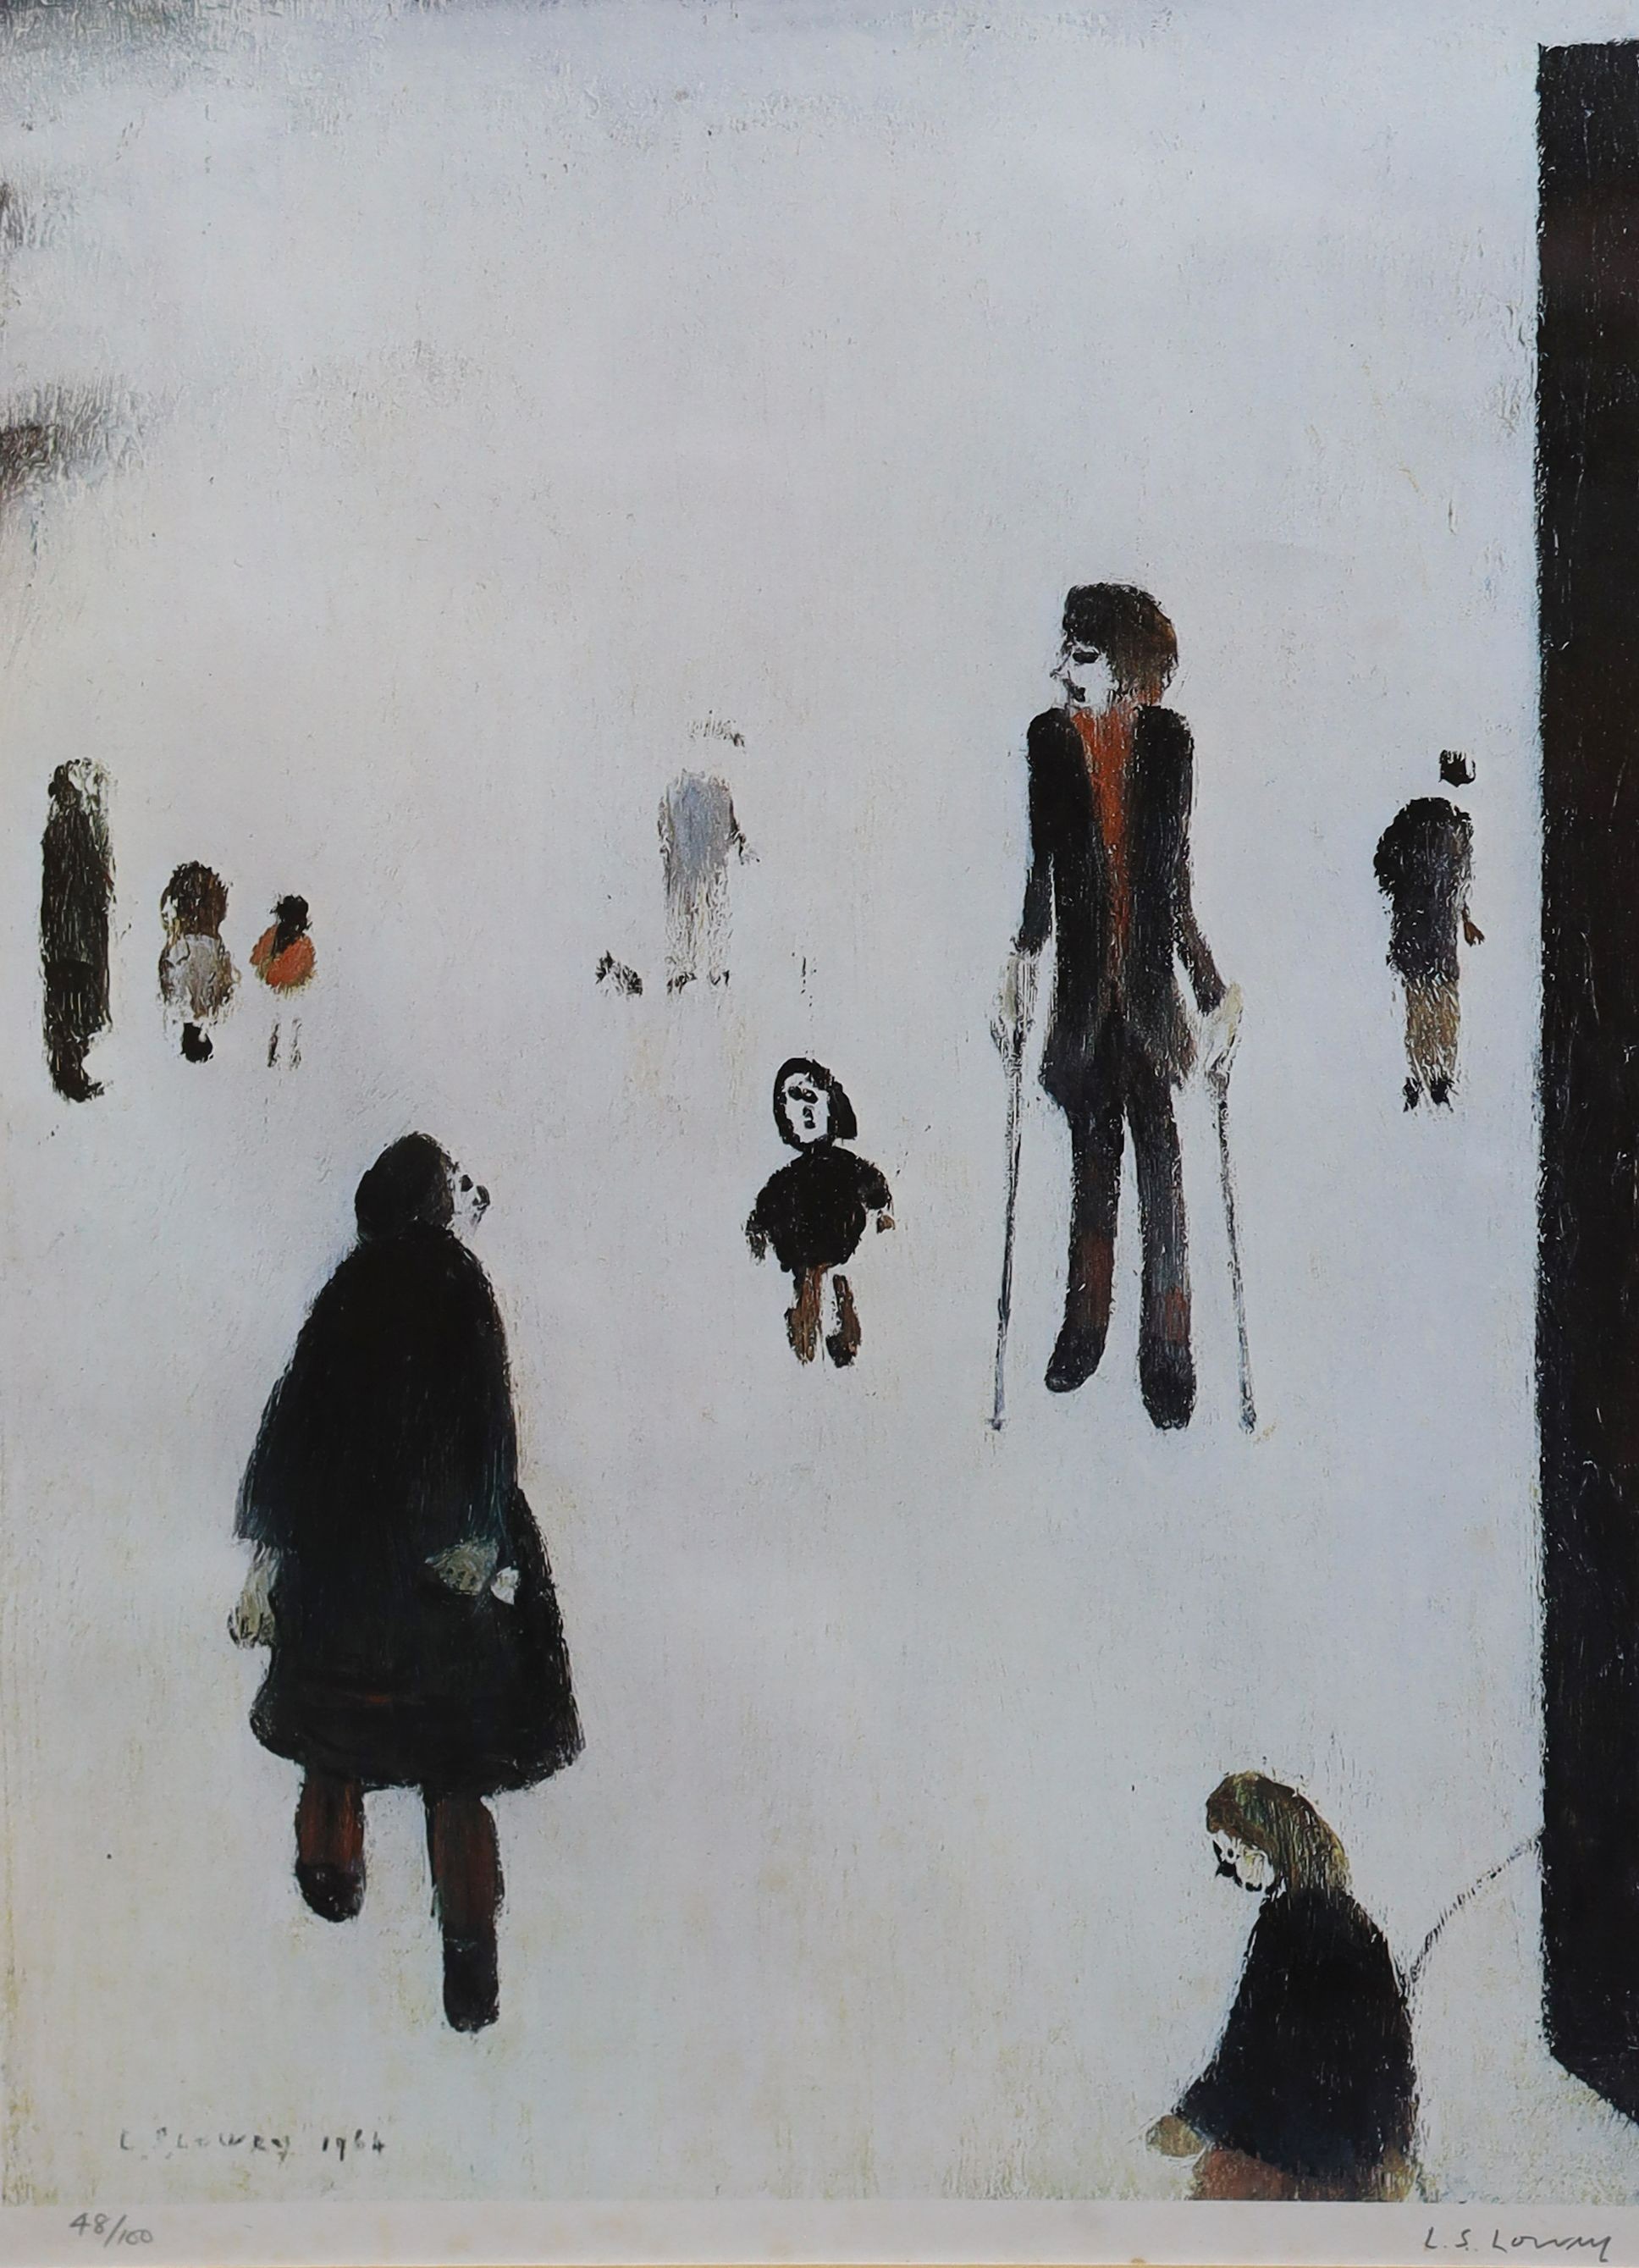 Lawrence Stephen Lowry (1887-1976), 'Figures in the Park', offset lithograph, 42 x 32cm